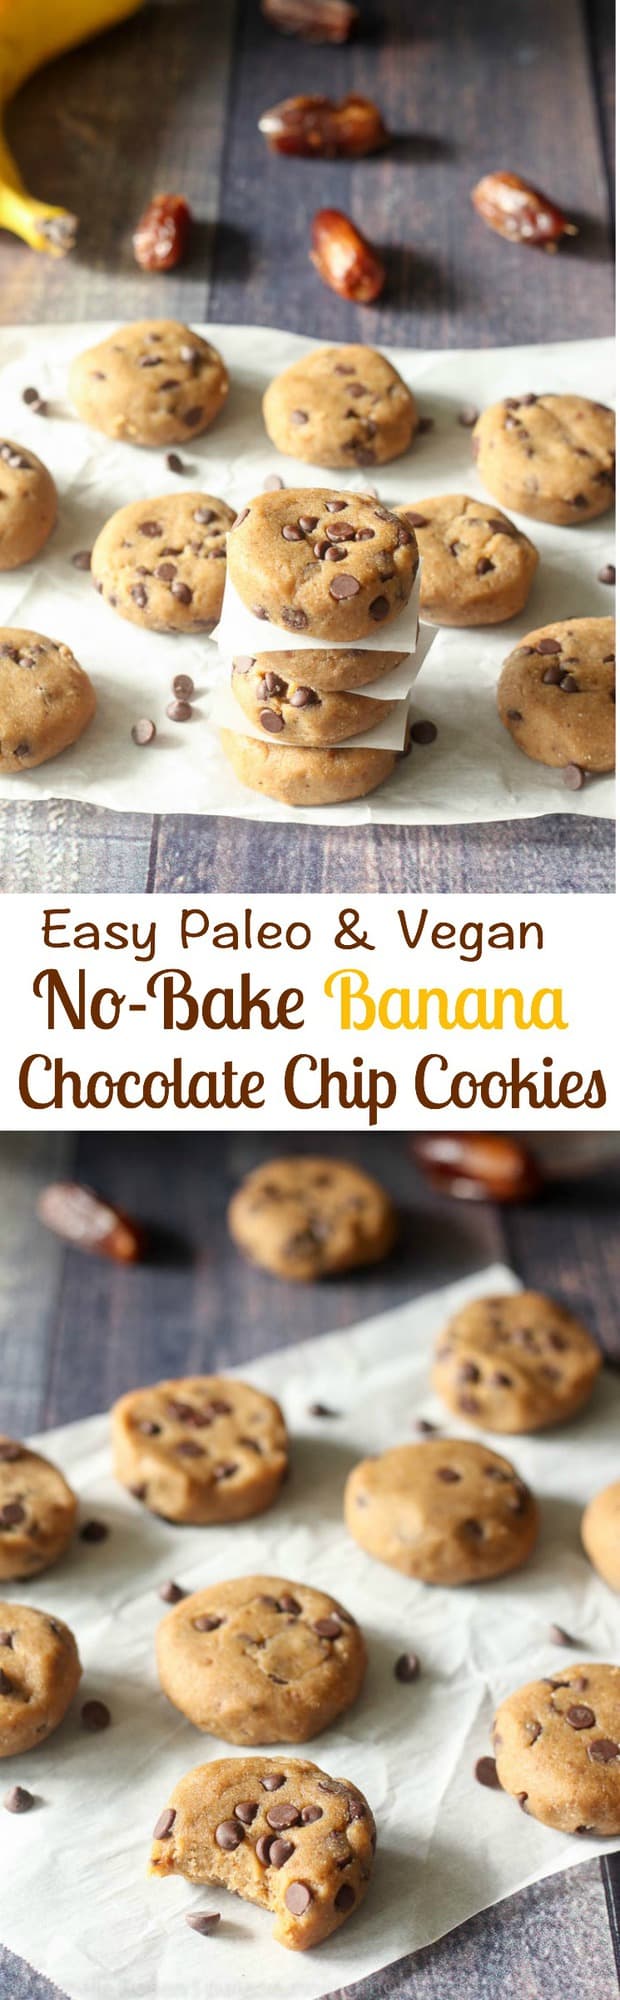 Easy Paleo and vegan no bake banana chocolate chip cookies, naturally sweetened with dates with cashew butter and coconut for the perfect